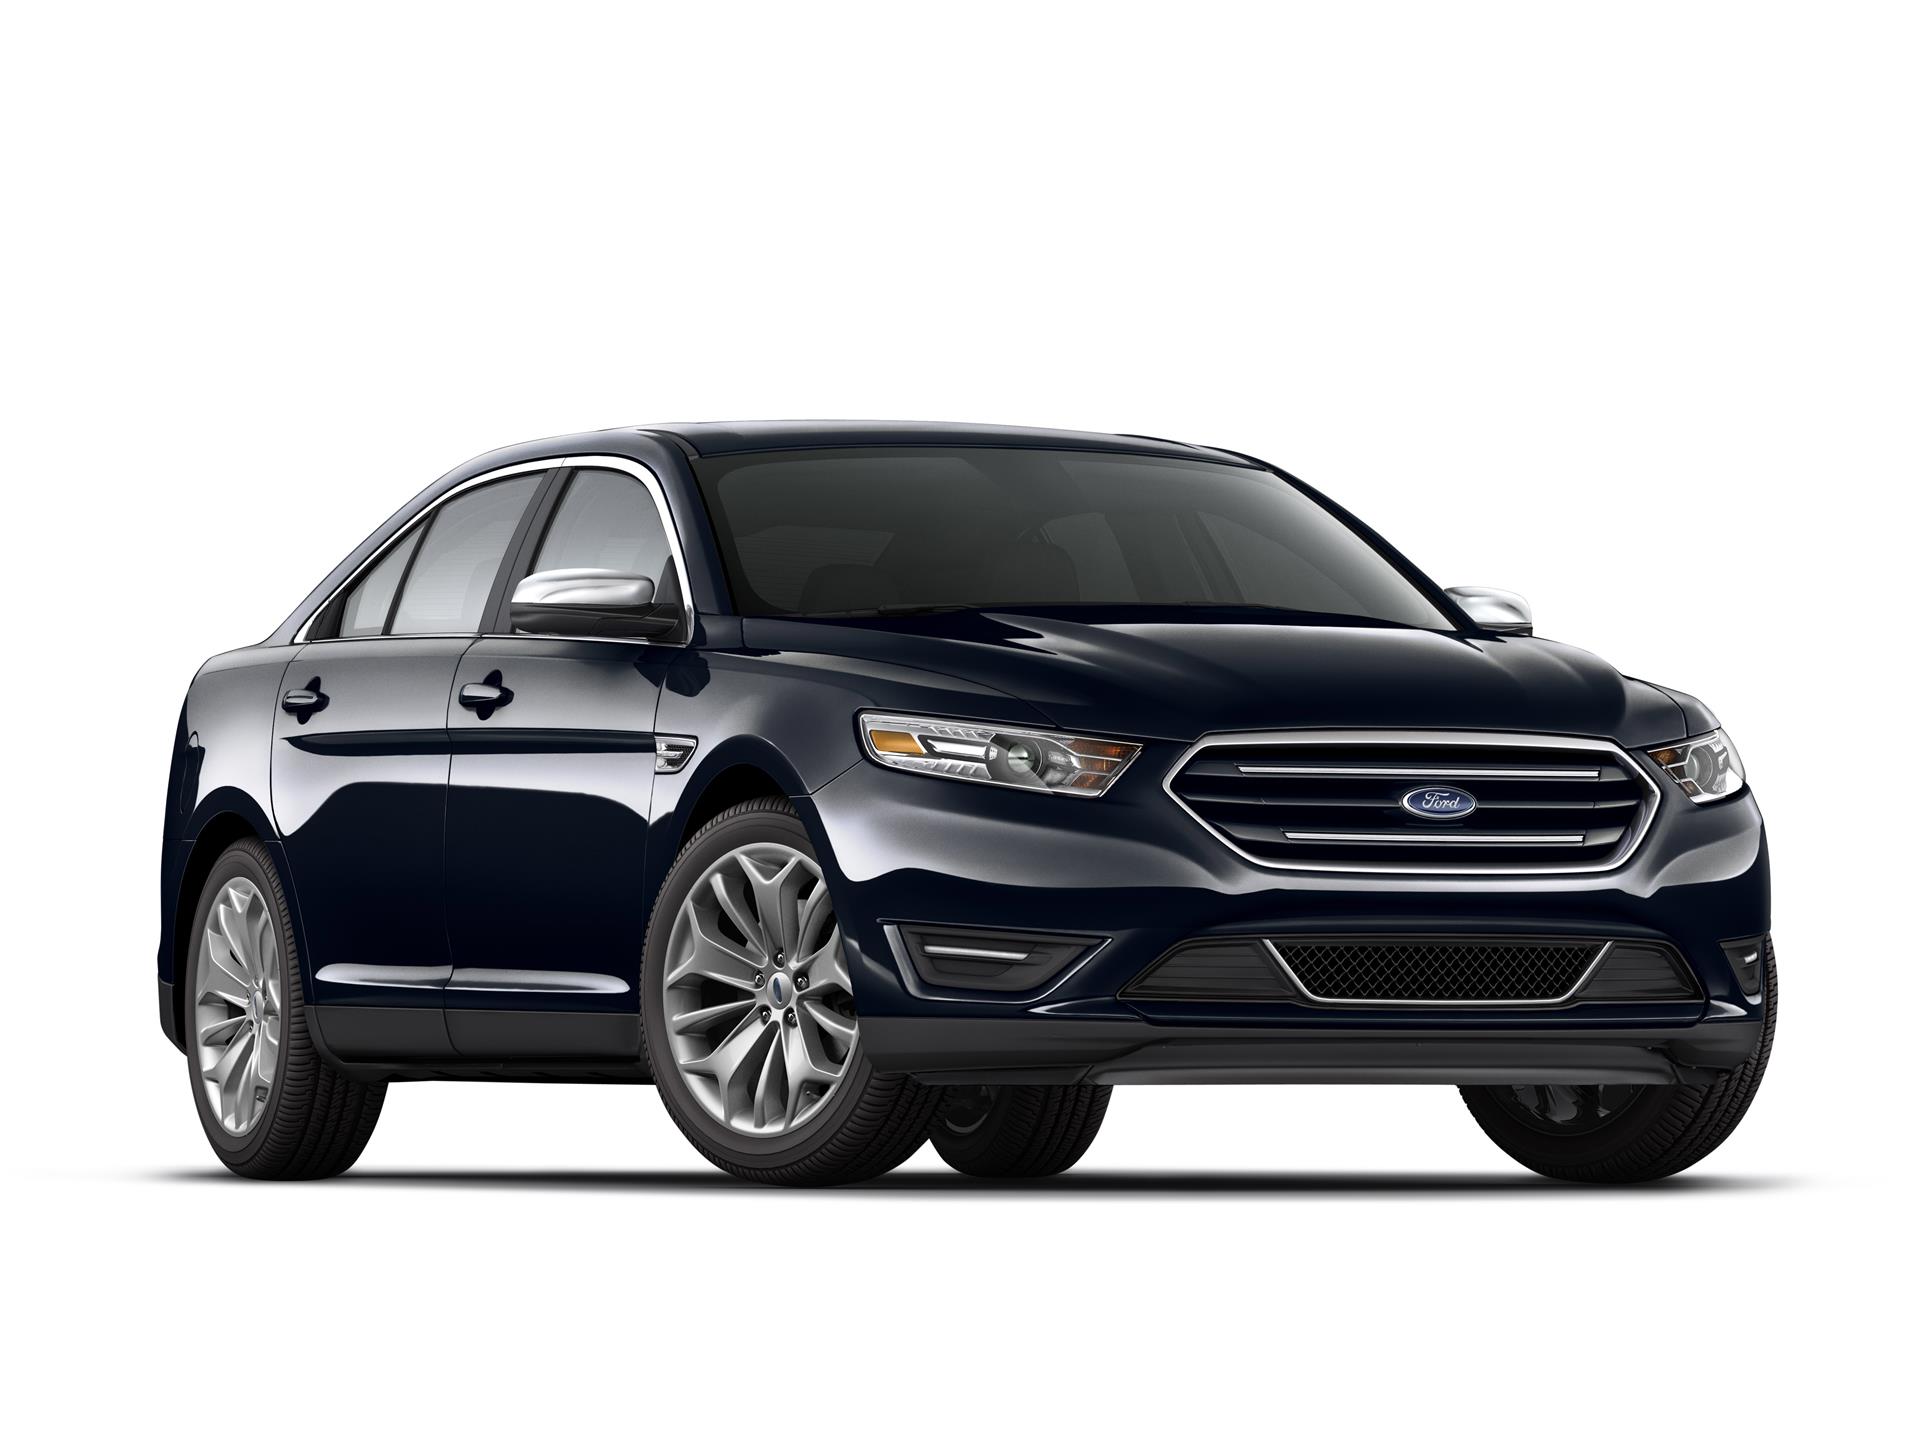 2015 Ford Taurus News and Information - conceptcarz.com